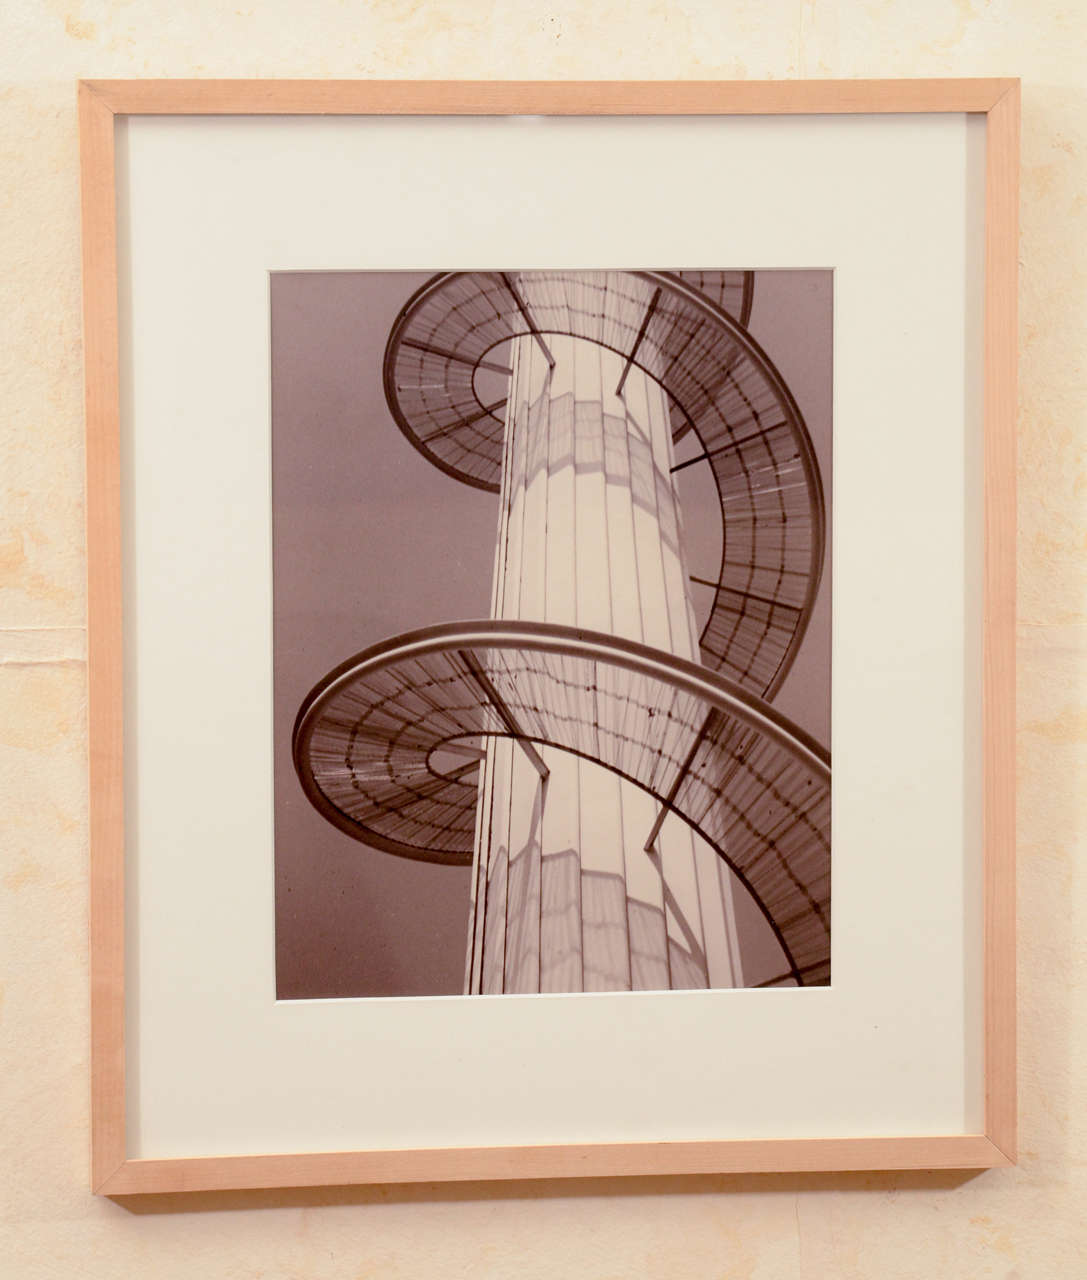 This sepia toned black and white photograph by George Henry High depicts the Light Tower of the Pavillon de Marine Marchande at the 1937 Exposition Internationale des Arts et Techniques dans la Vie Moderne (International Exposition dedicated to Art